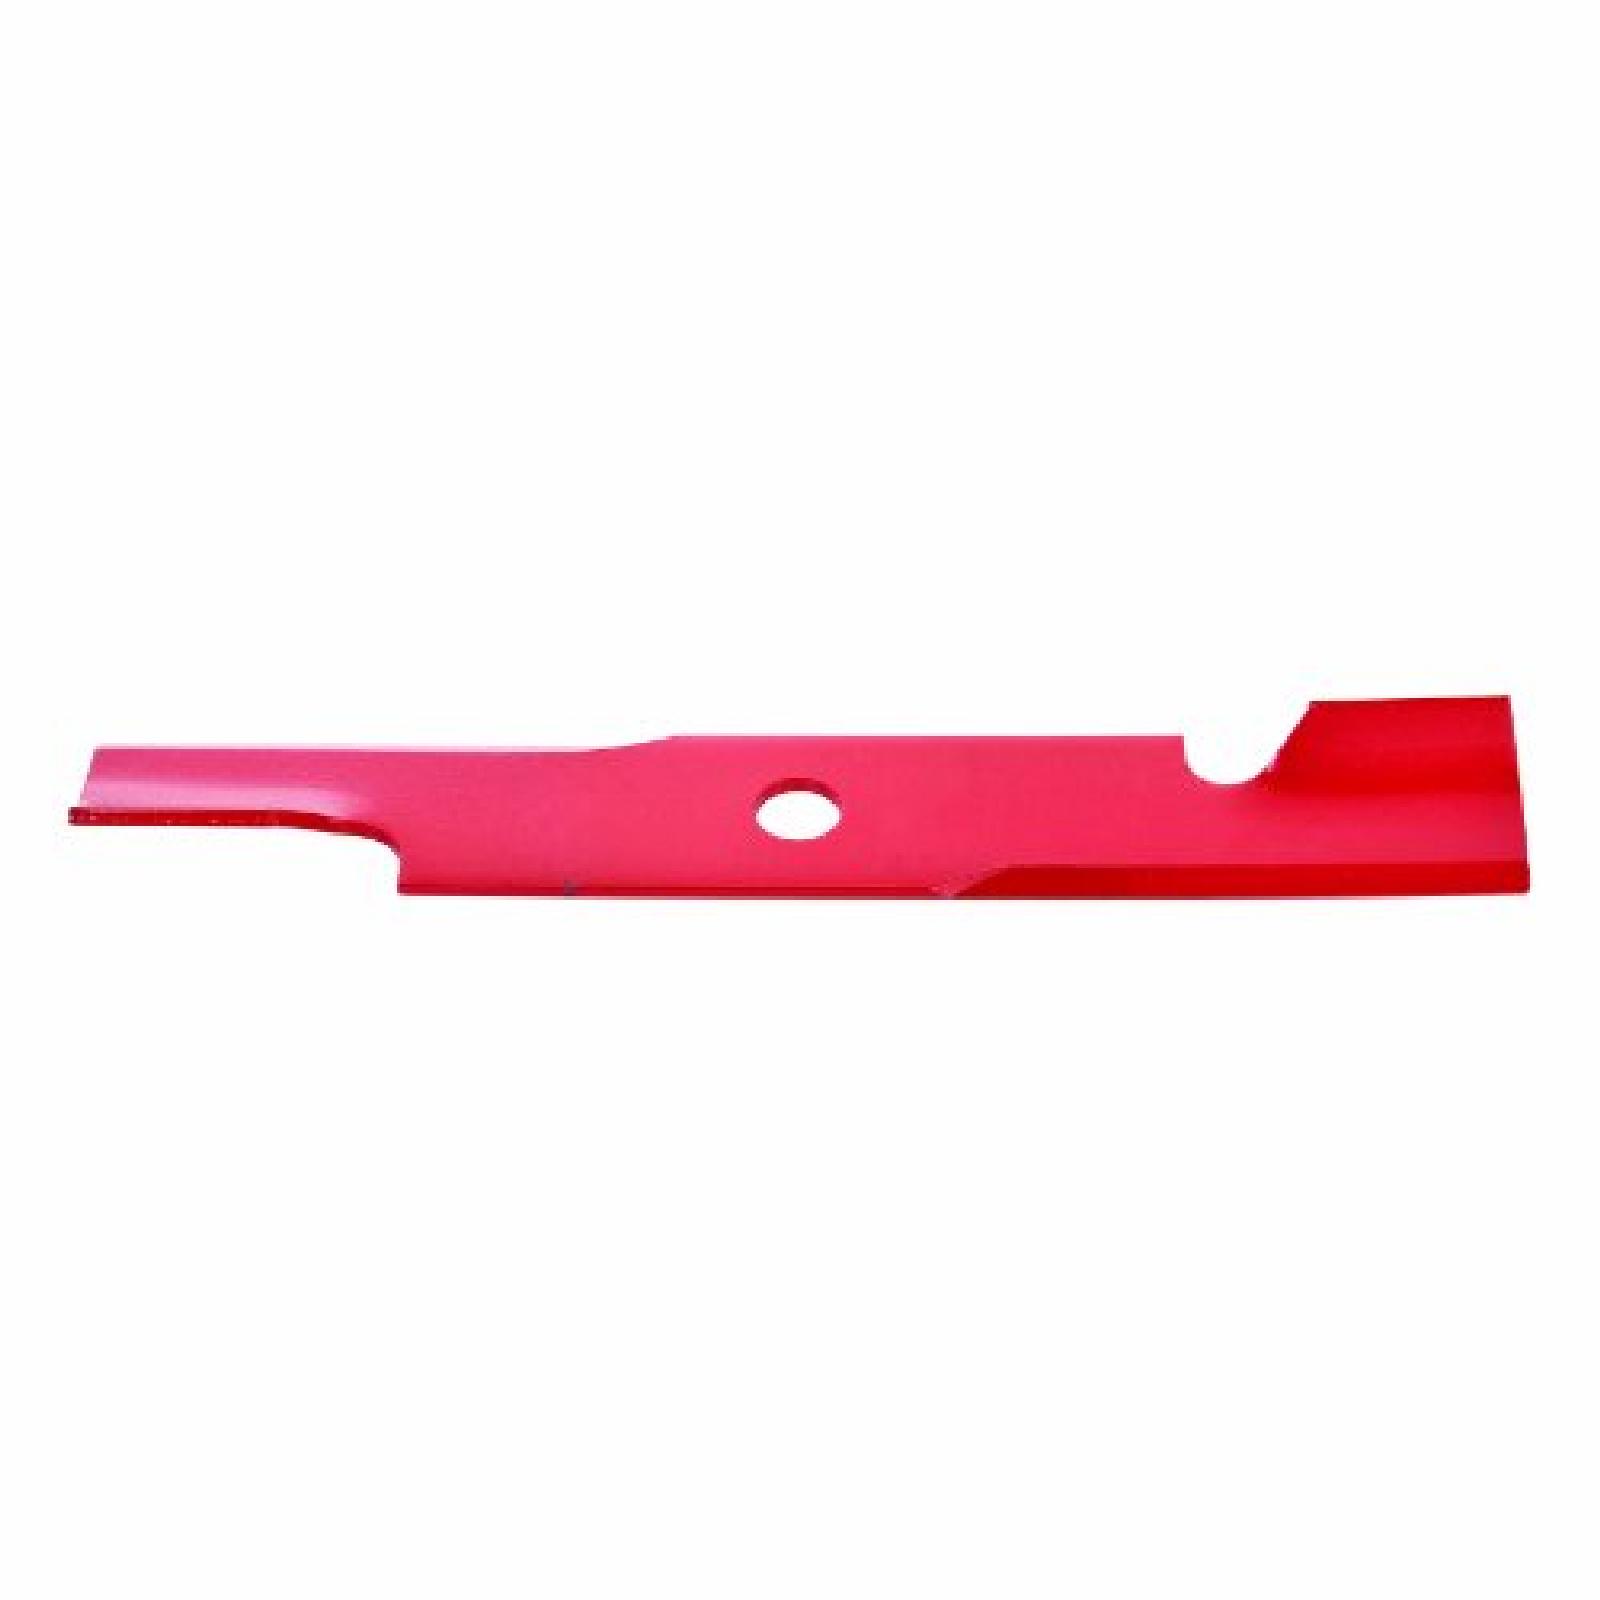 BLADE, EXMARK 20 1/2IN HI part# 92-209 by Oregon - Click Image to Close